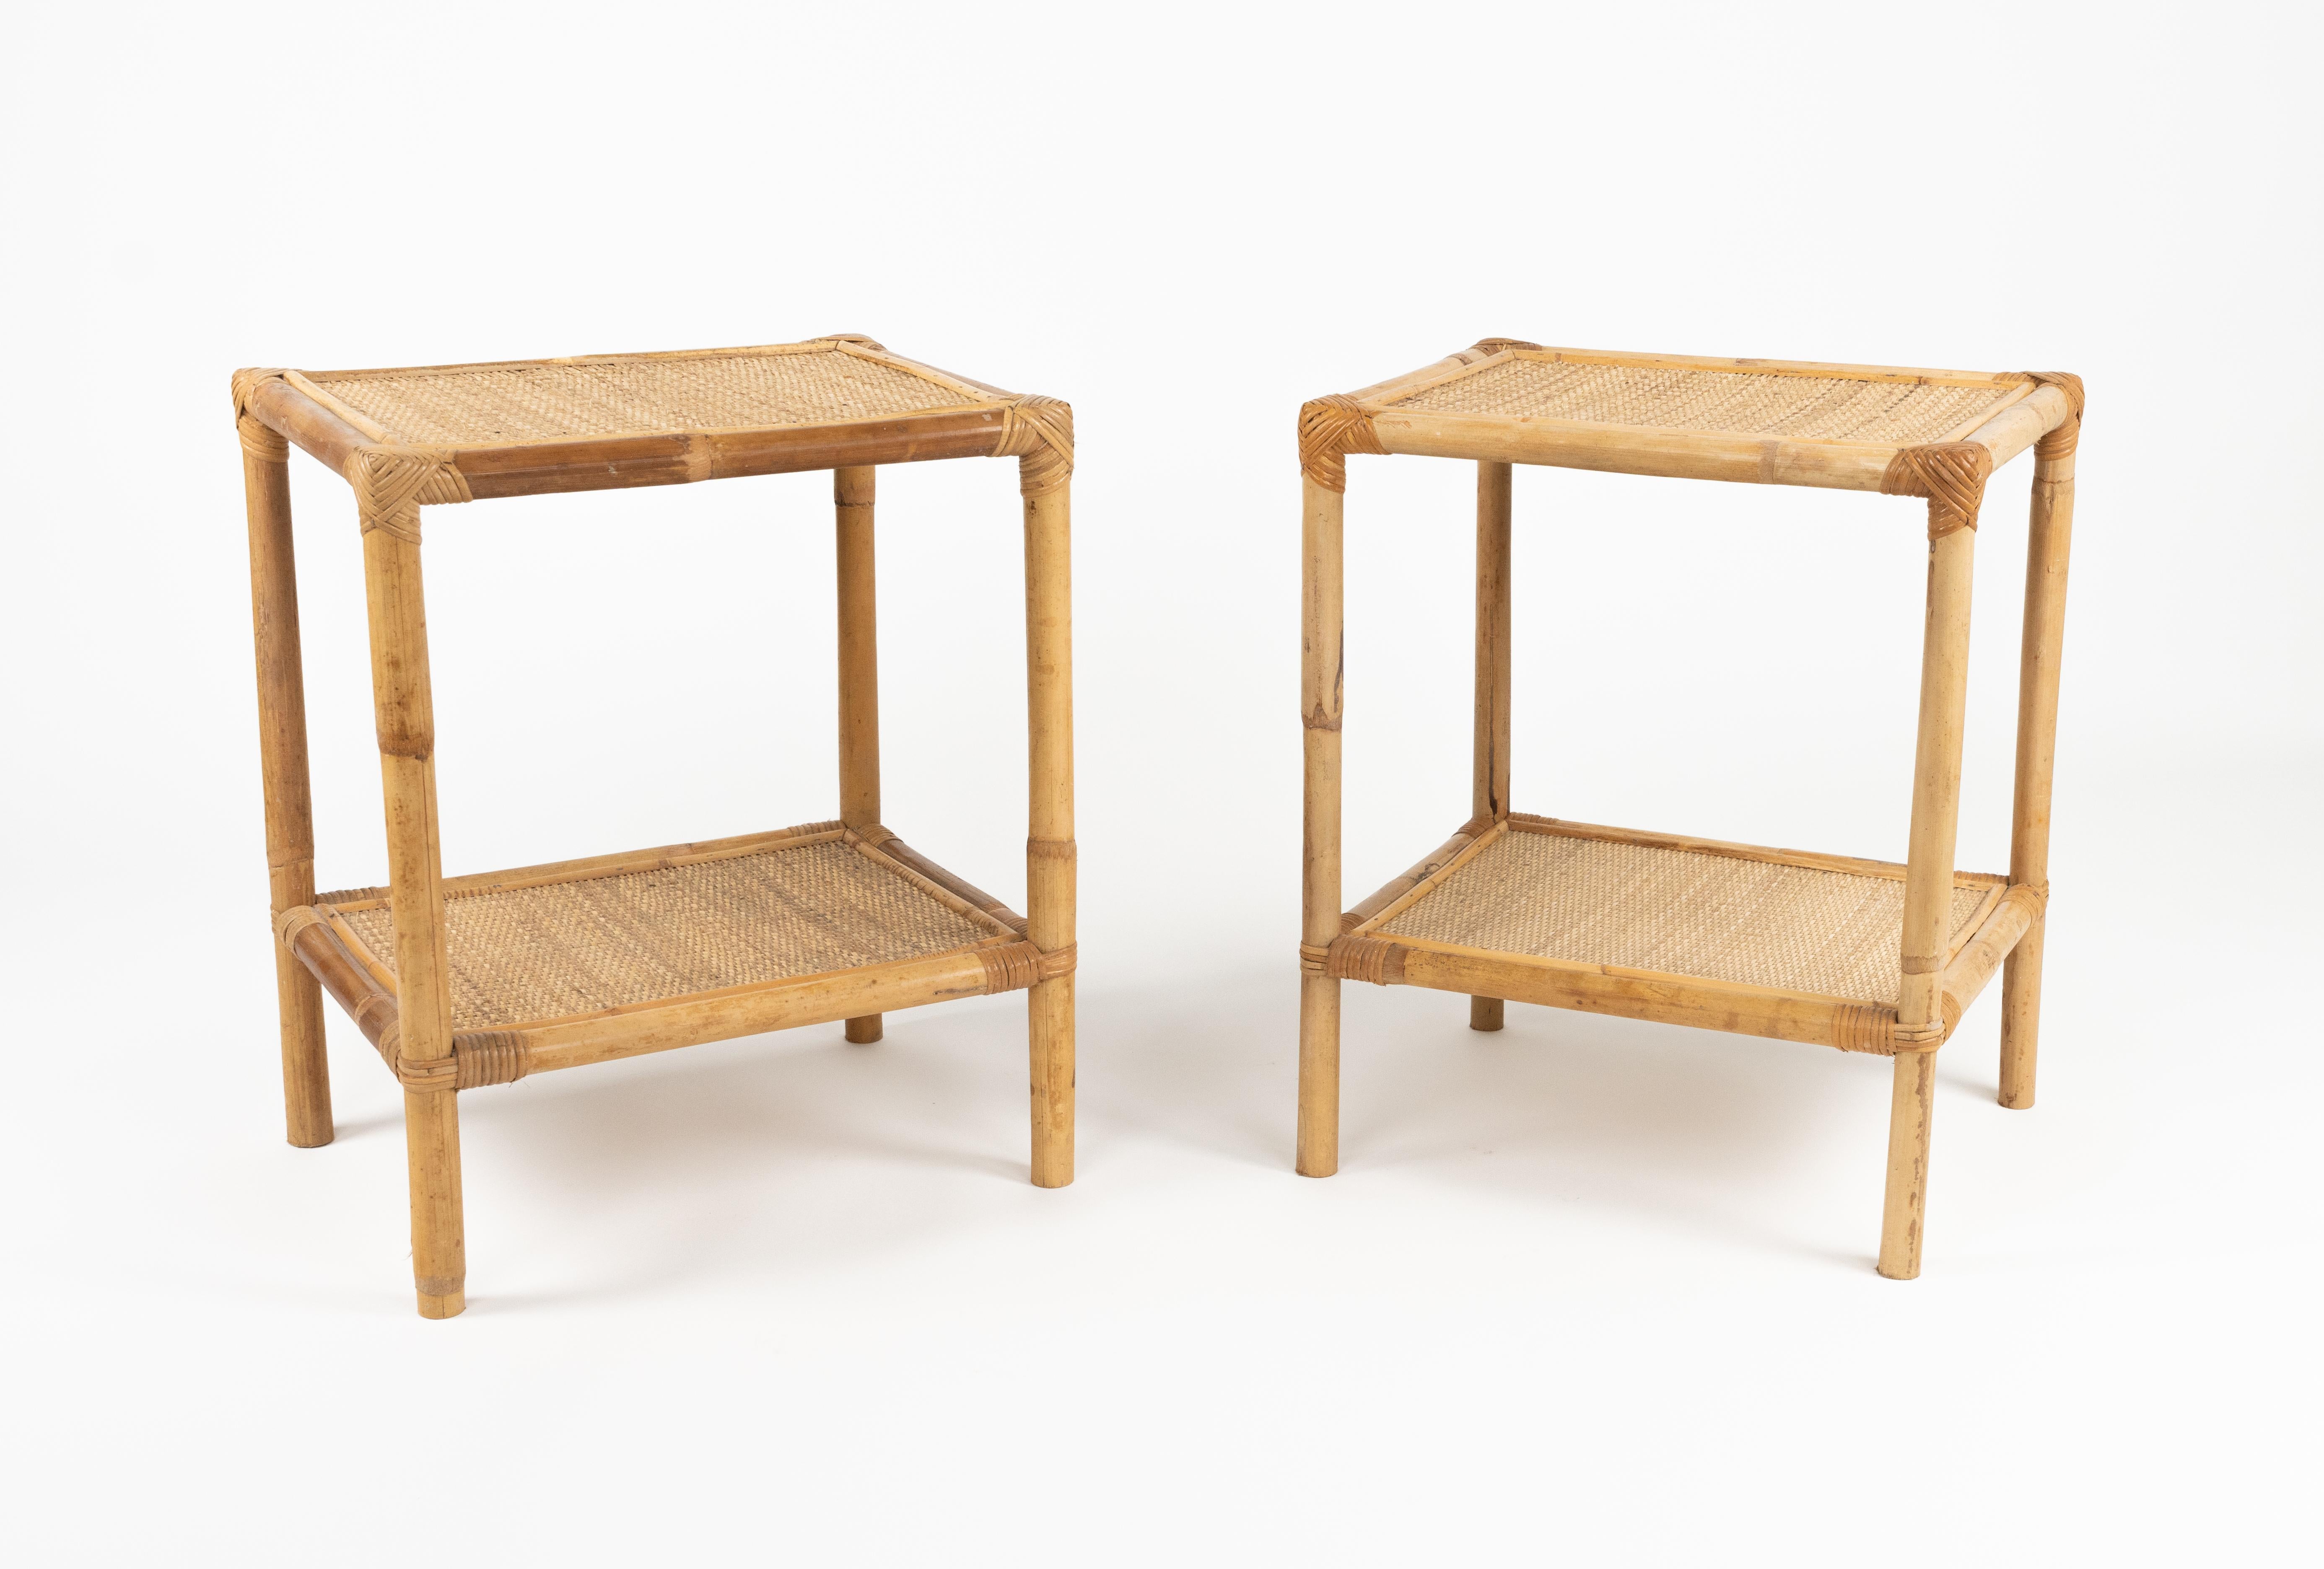 Midcentury beautiful pair of bedside tables or nightstands in bamboo, rattan and wicker.  

Made in Italy in the 1970s.